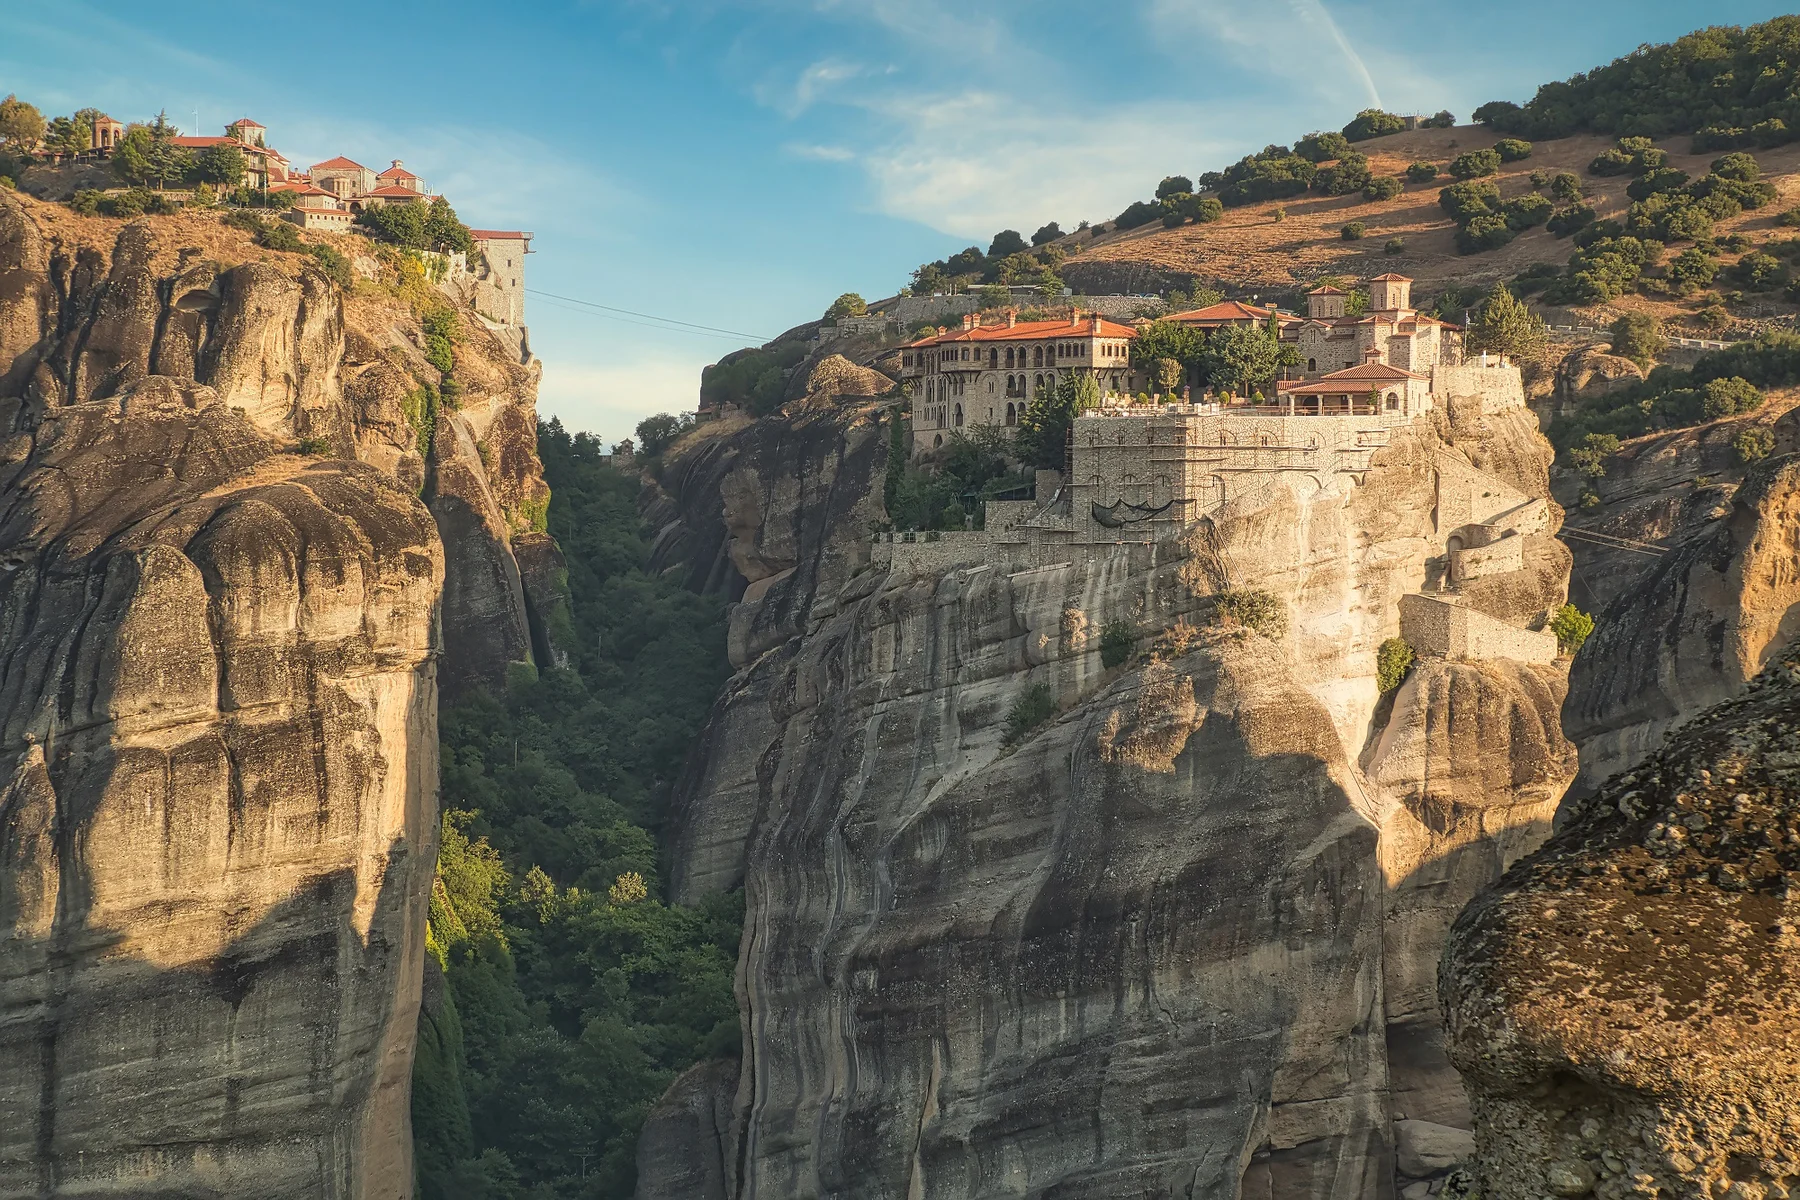 The old cliff-top monastery in Meteora, Thessaly, Greece